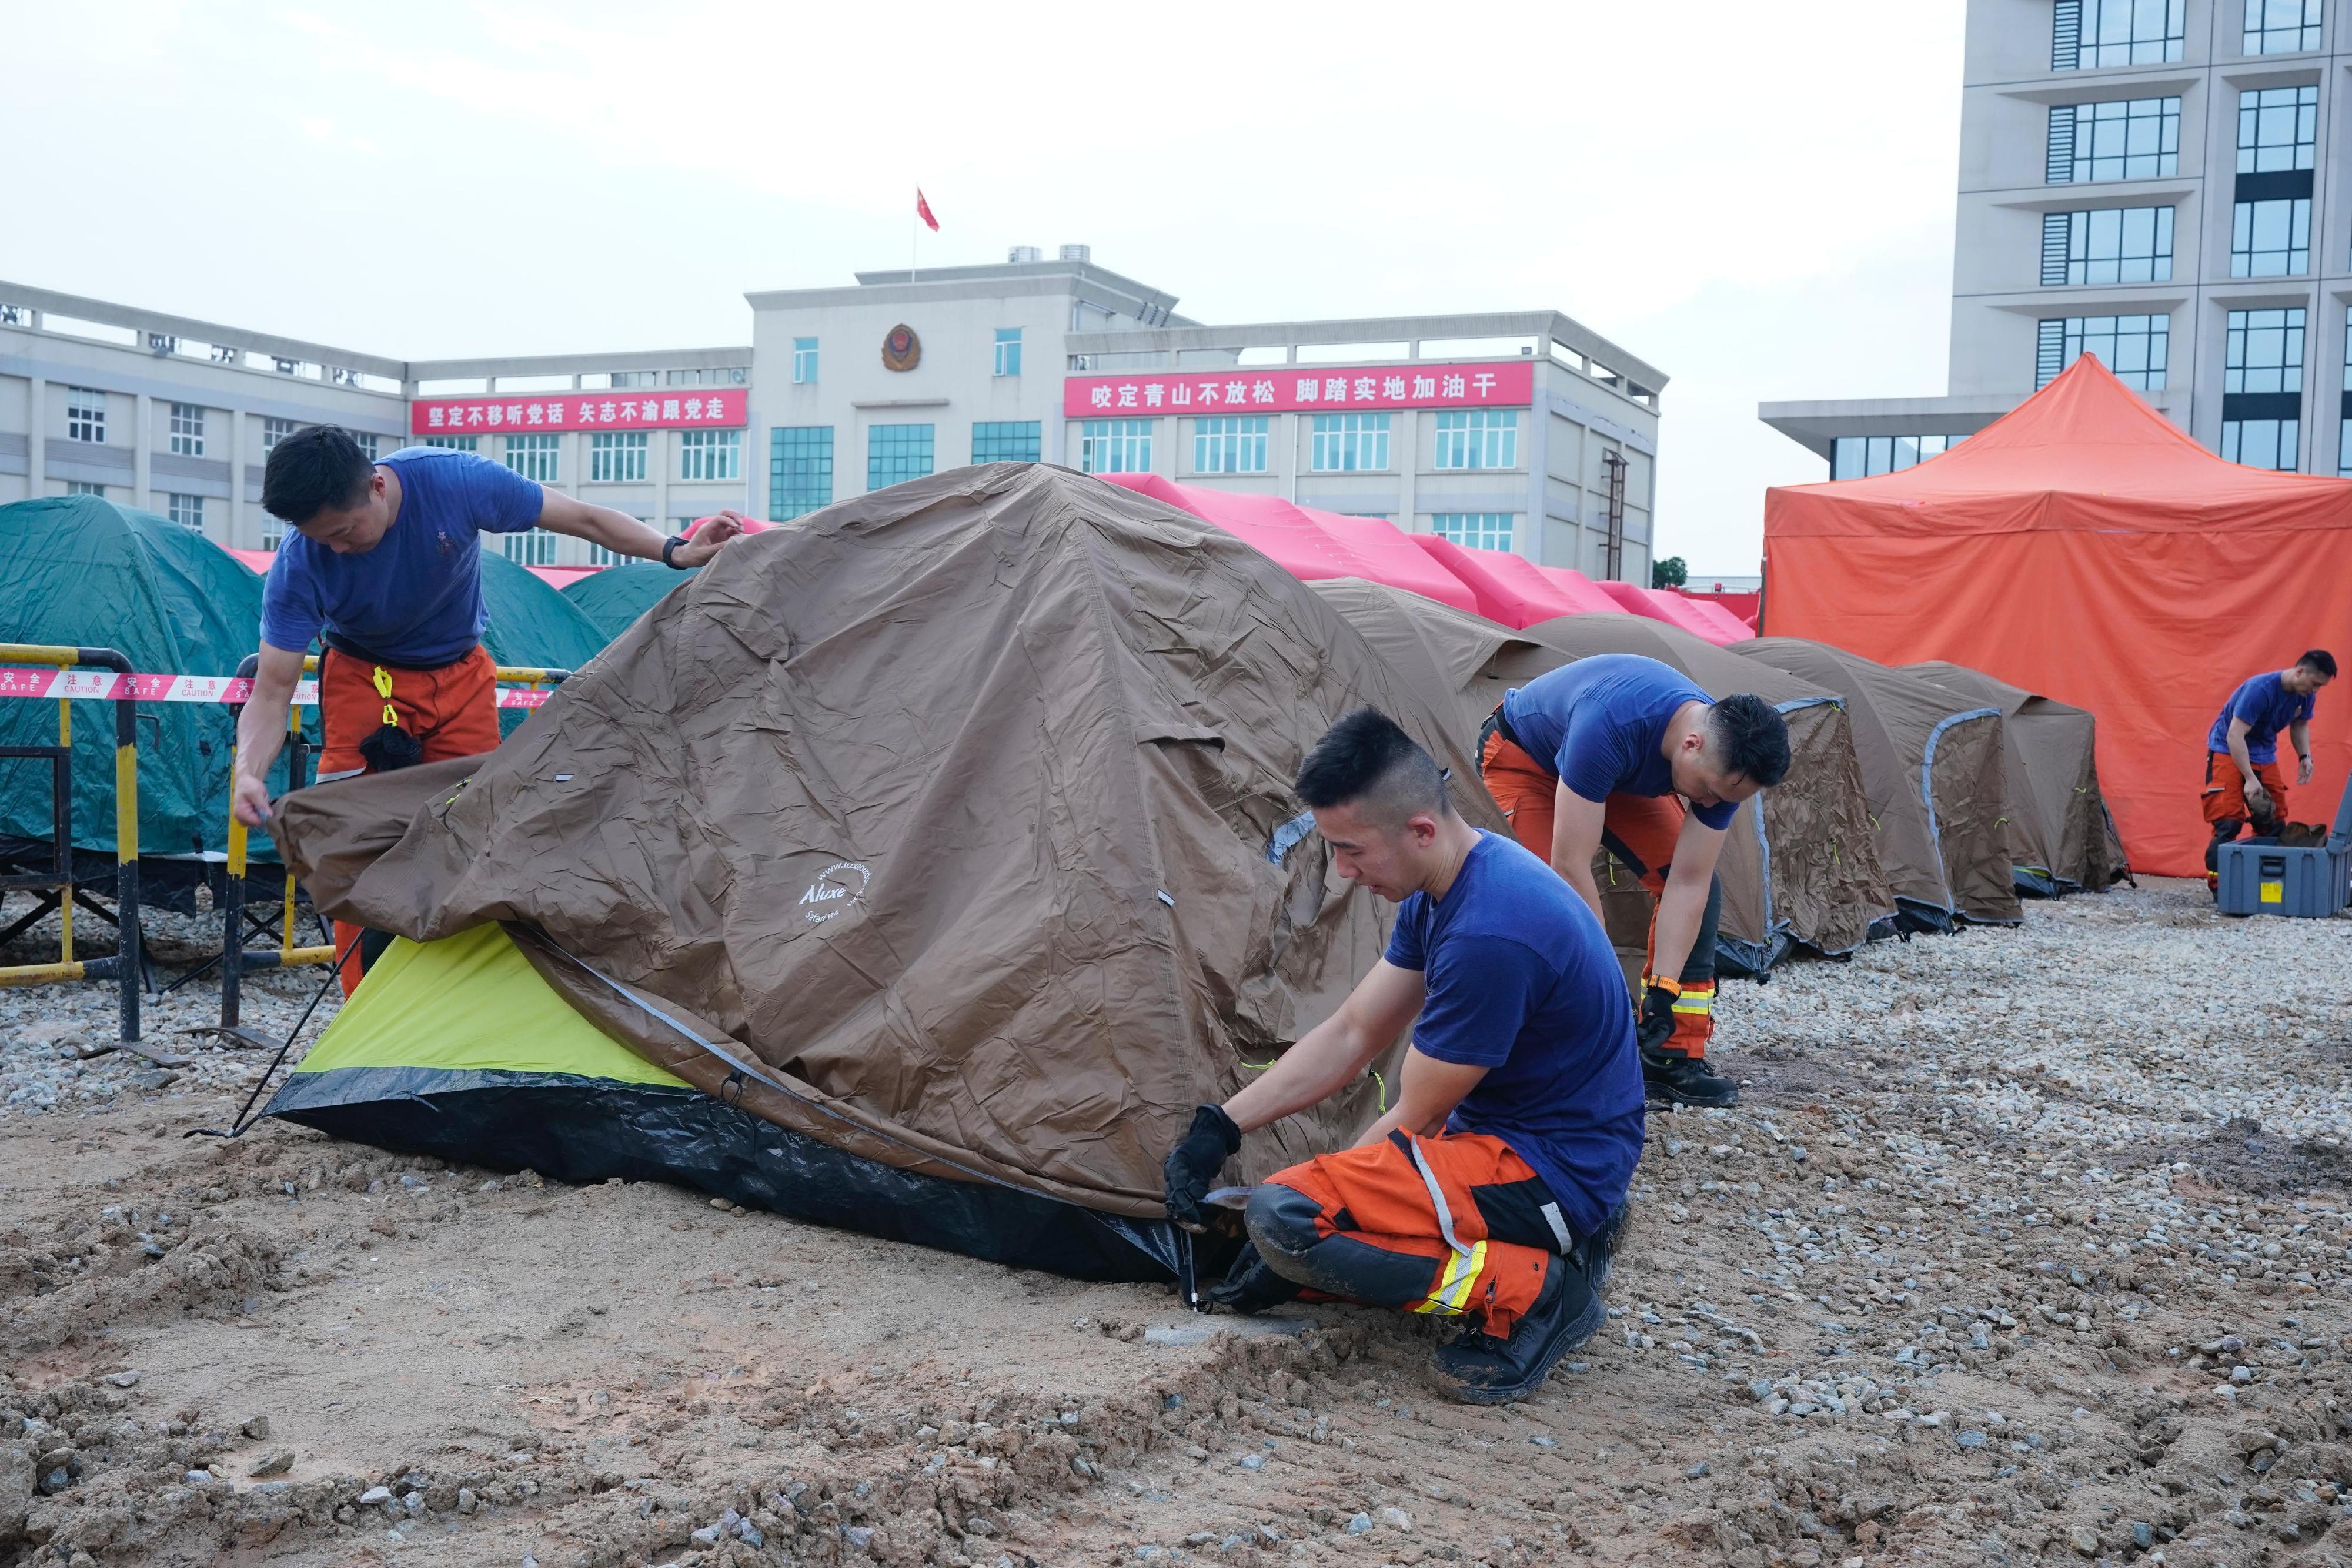 The Fire and Rescue Corps of Guangdong Province, the Hong Kong Fire Services Department (FSD) and the Macao Fire Services Bureau have conducted the Guangdong-Hong Kong-Macao Greater Bay Area joint emergency response and rescue exercise "Liancheng-2024" in Jiangmen, Guangdong Province from May 27 to today (May 29). Photos shows members of the Disaster Response and Rescue Team of the FSD setting up the operational base after arriving at the site of exercise.